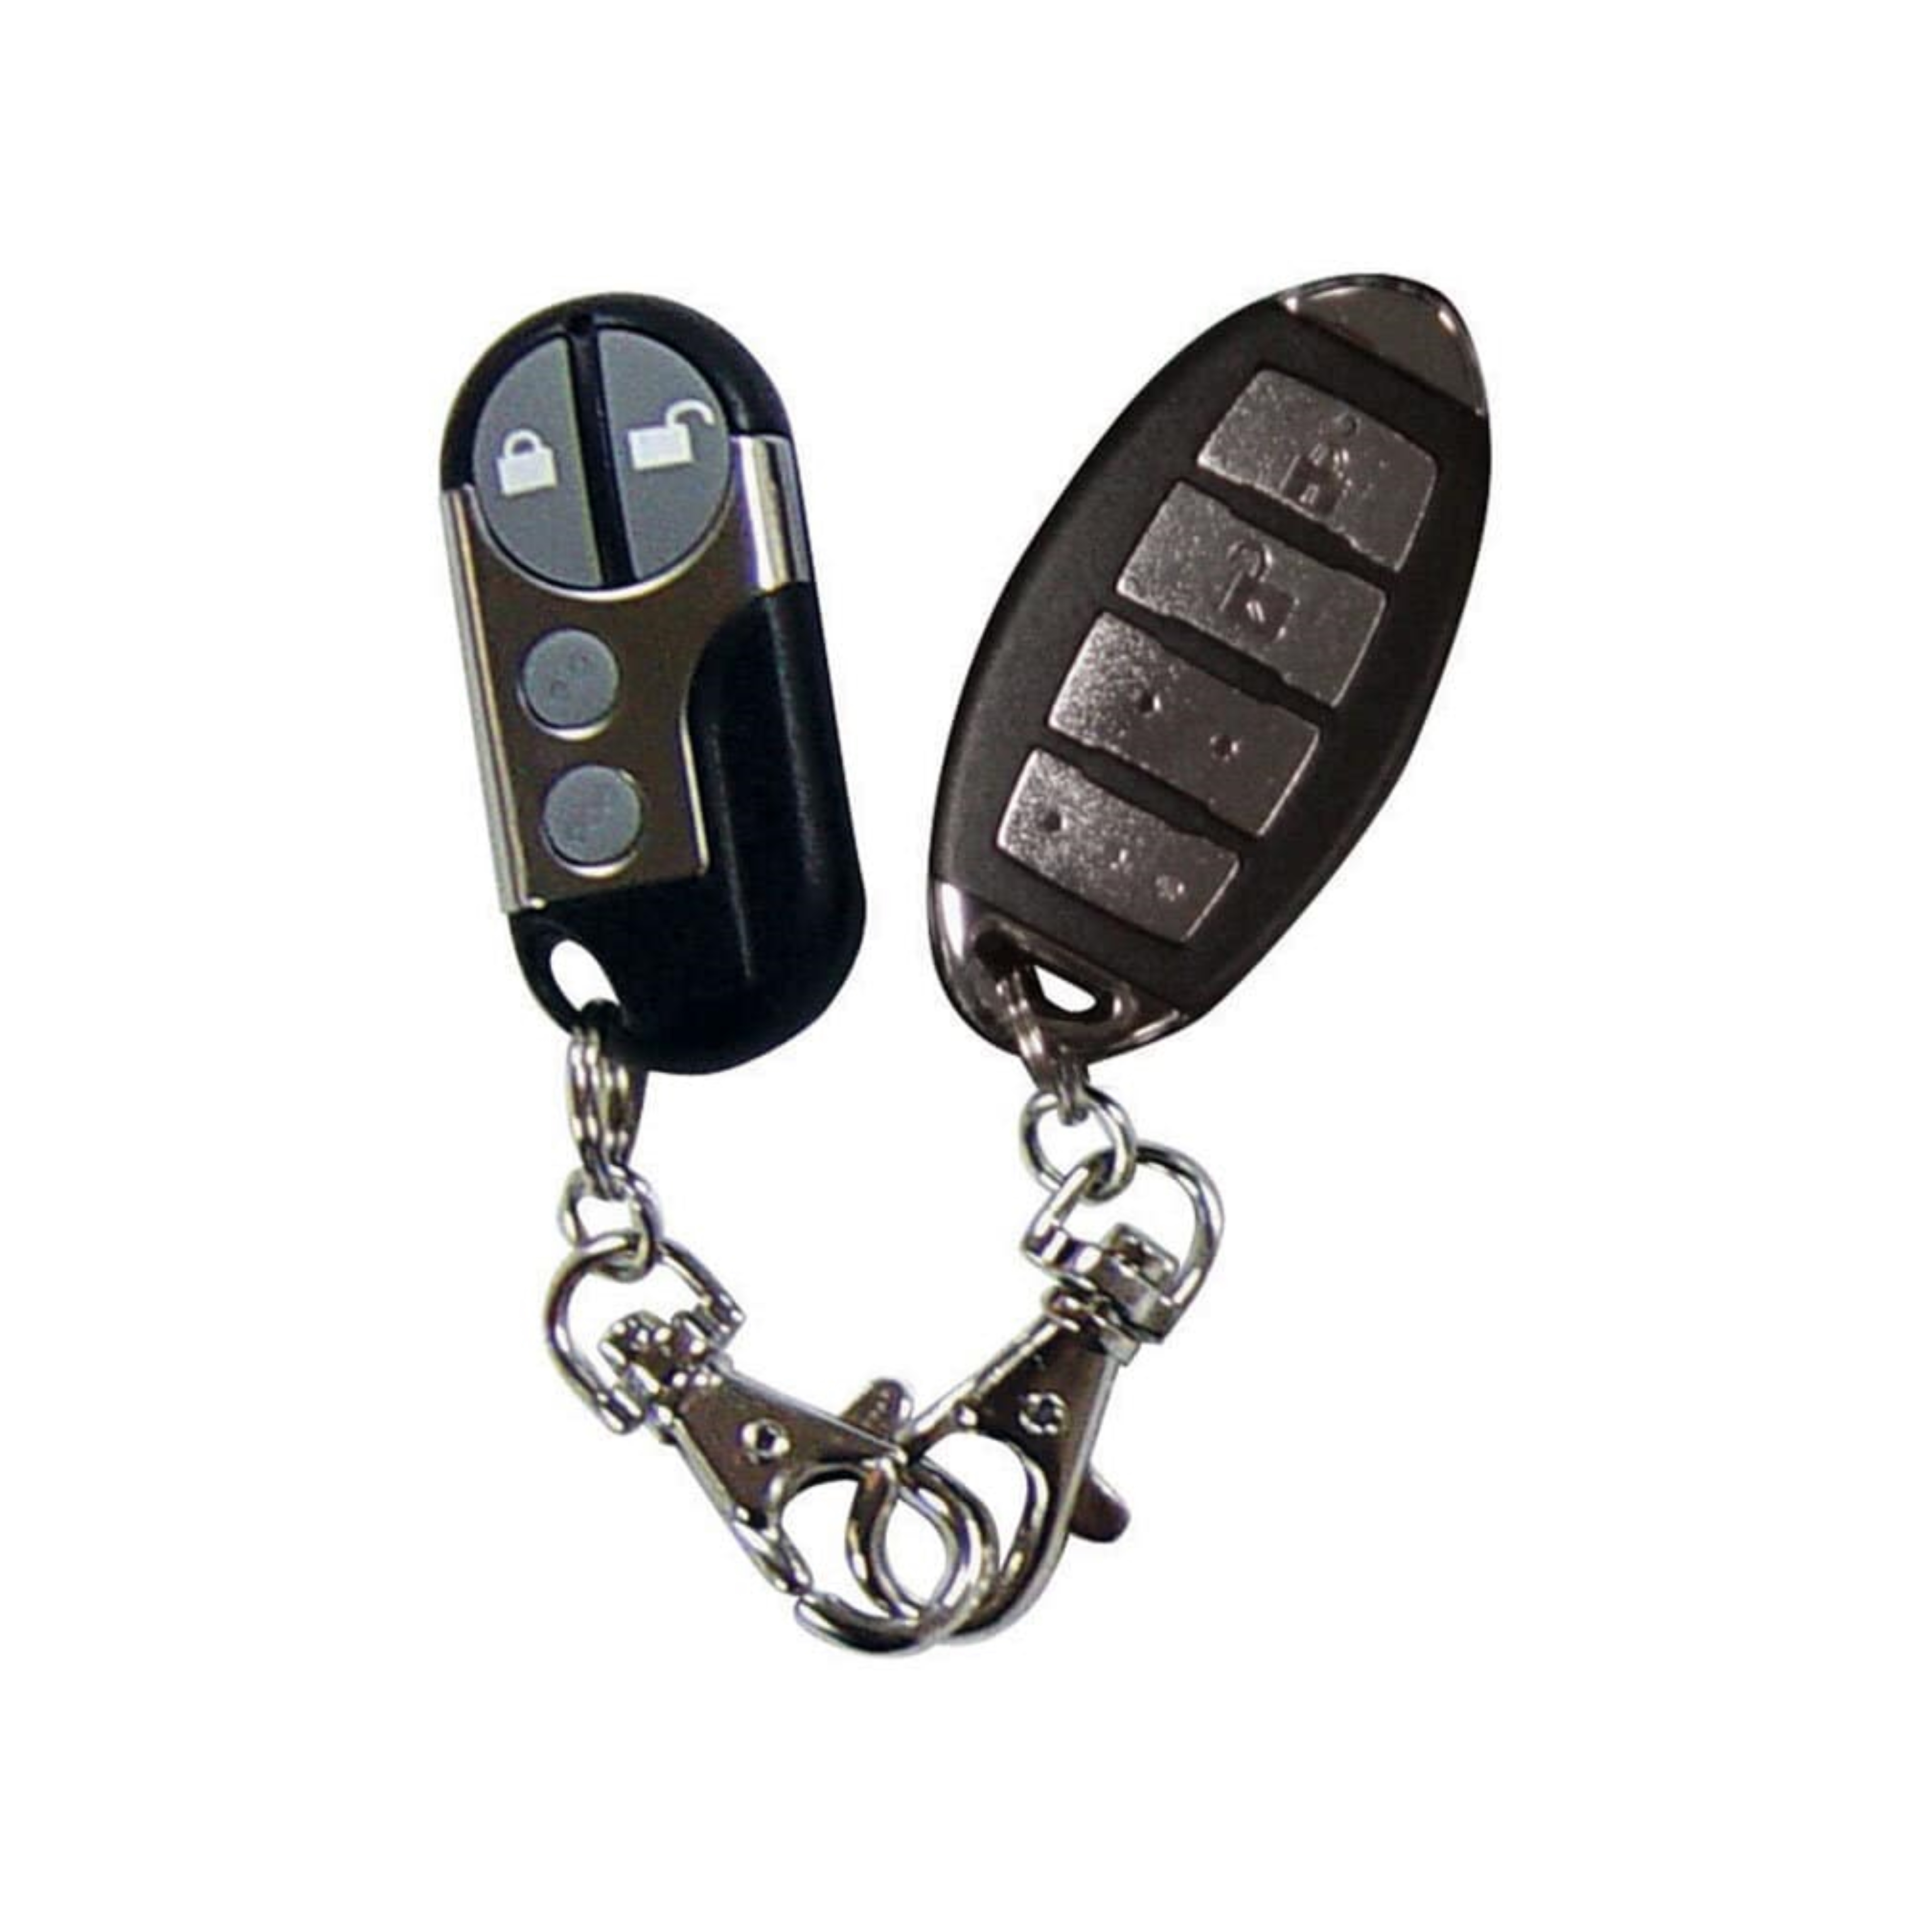 Excalibur Alarms Omega Key-less Entry And Security Starter Interrupt Two 4 Button Transmitters